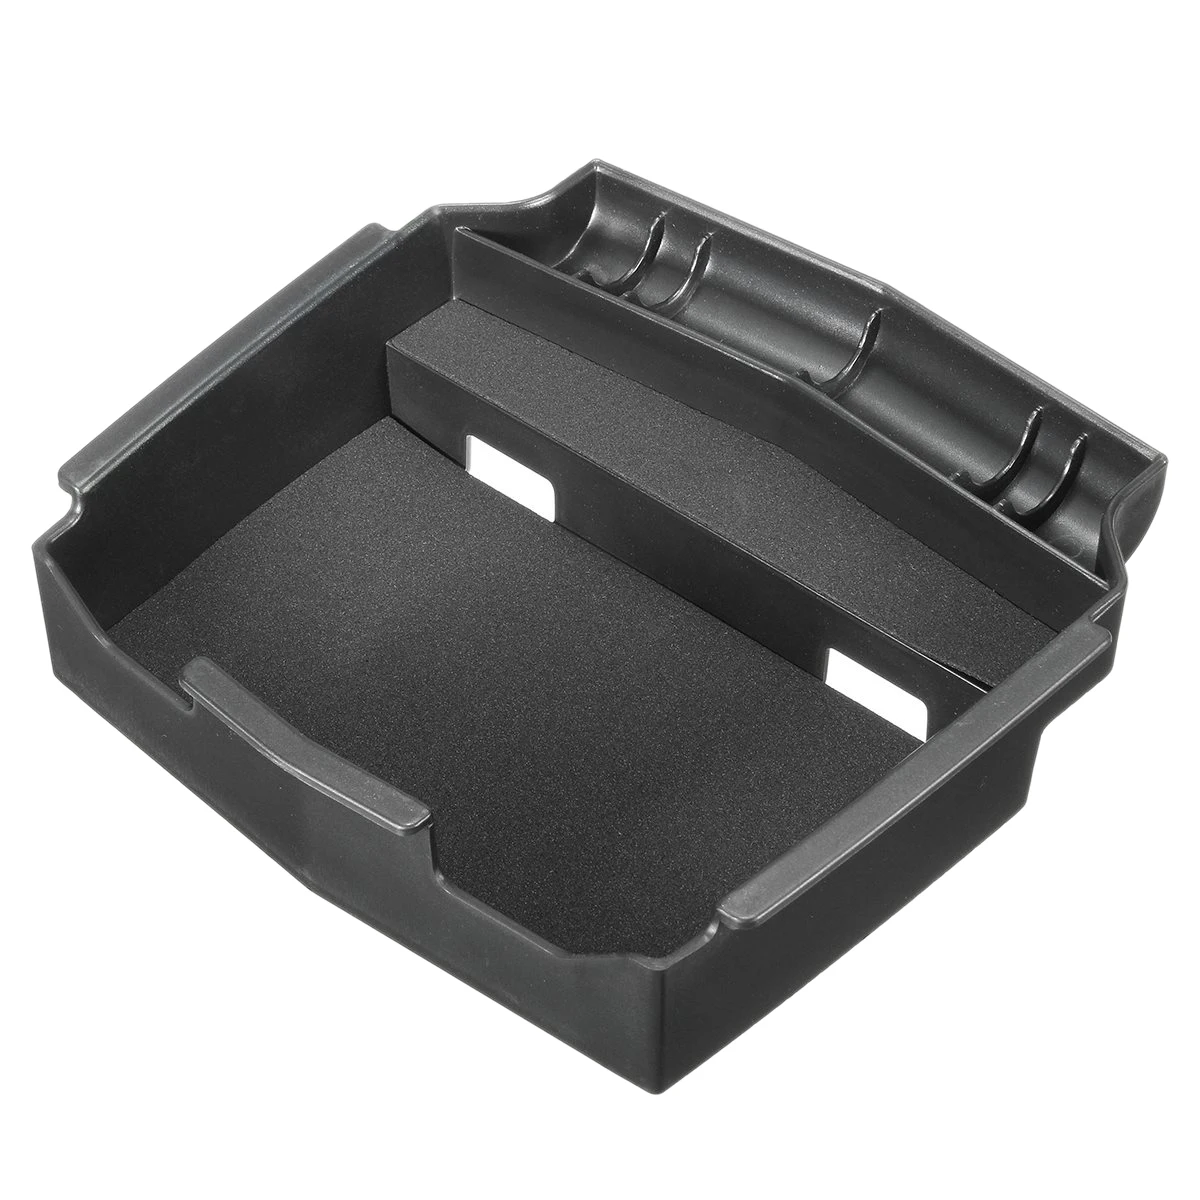 

Car Multifunction Central Storage Box for Honda CRV 2012-2016 Interior Accessories Stowing Tidying